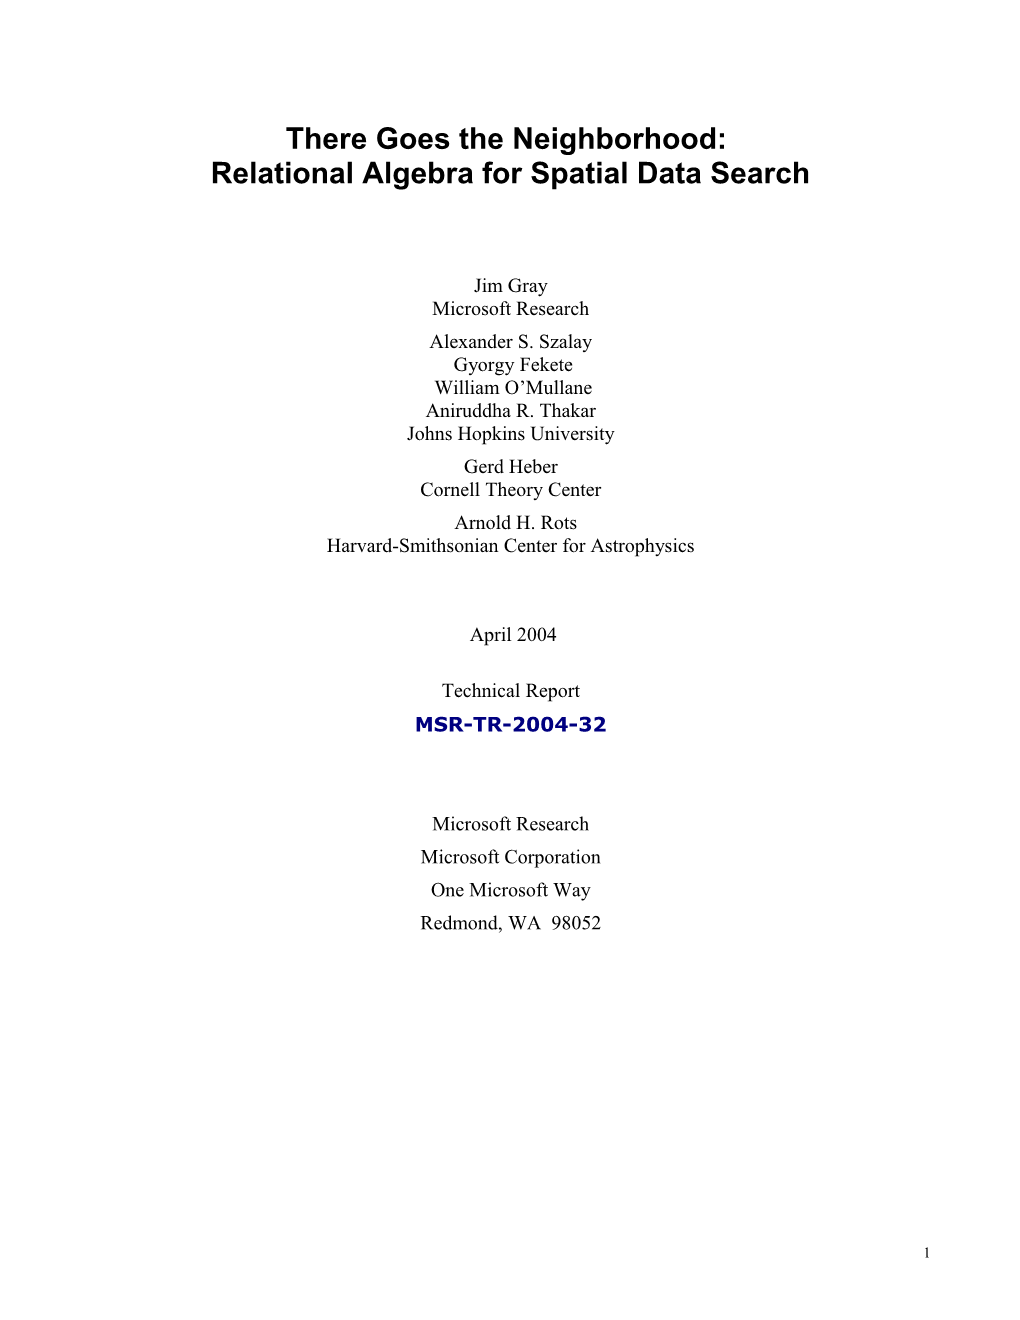 There Goes The Neighborhood: Relational Algebra For Spatial Data Search